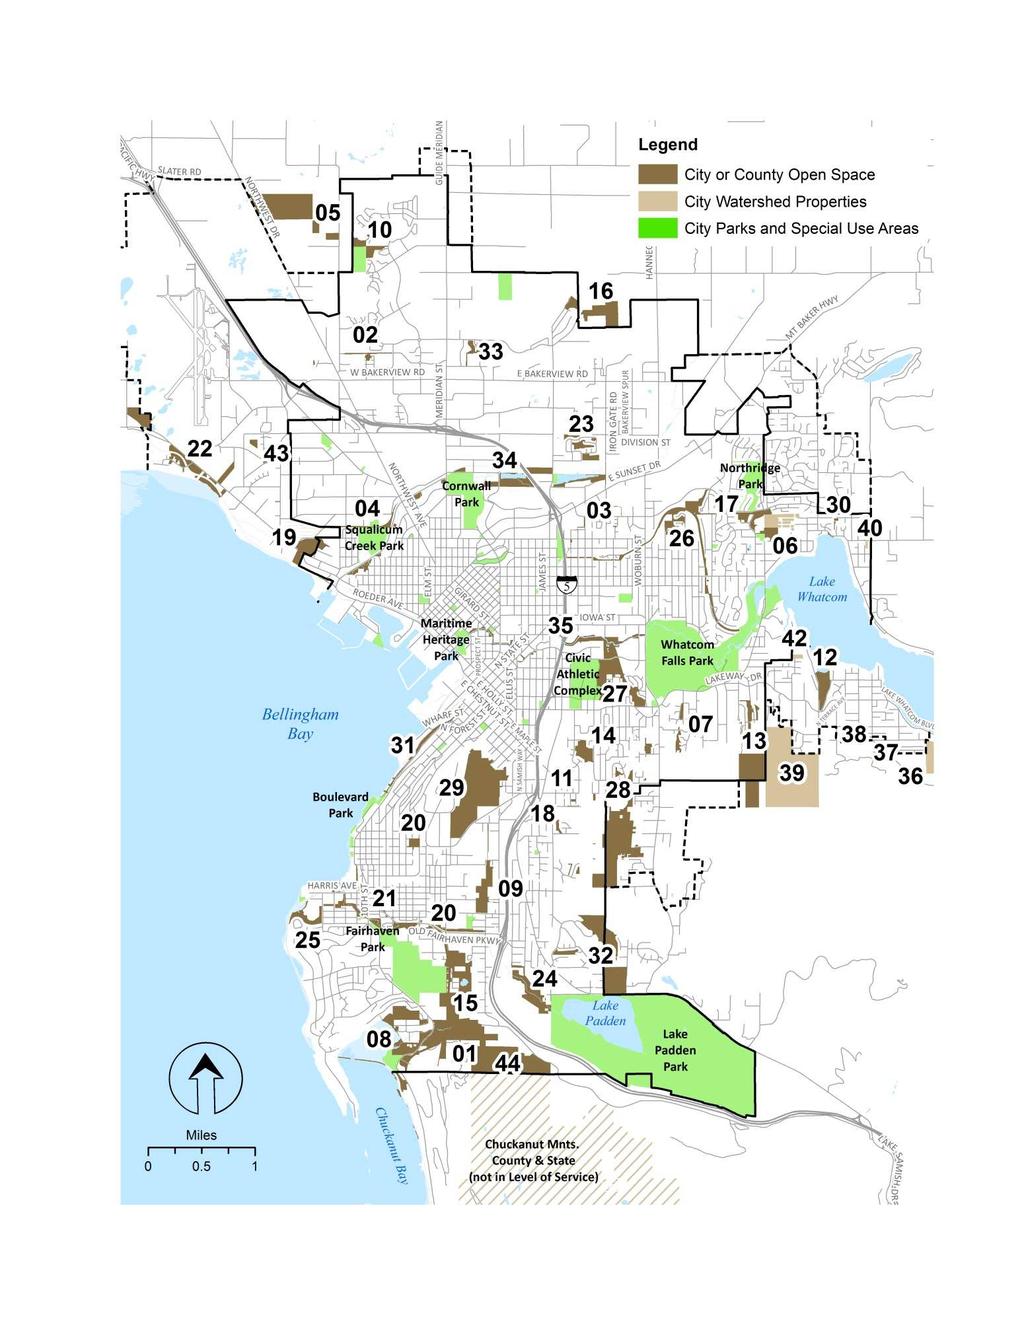 EXISTING FACILITIES PLAN OPEN SPACE Open Space 1. Arroyo Nature Area 2. Bakerview Open Space 3. Barkley Greenway & Trail 4. Bay to Baker Greenway 5. Bear Creek Greenway 6. Big Rock Open Space 7.